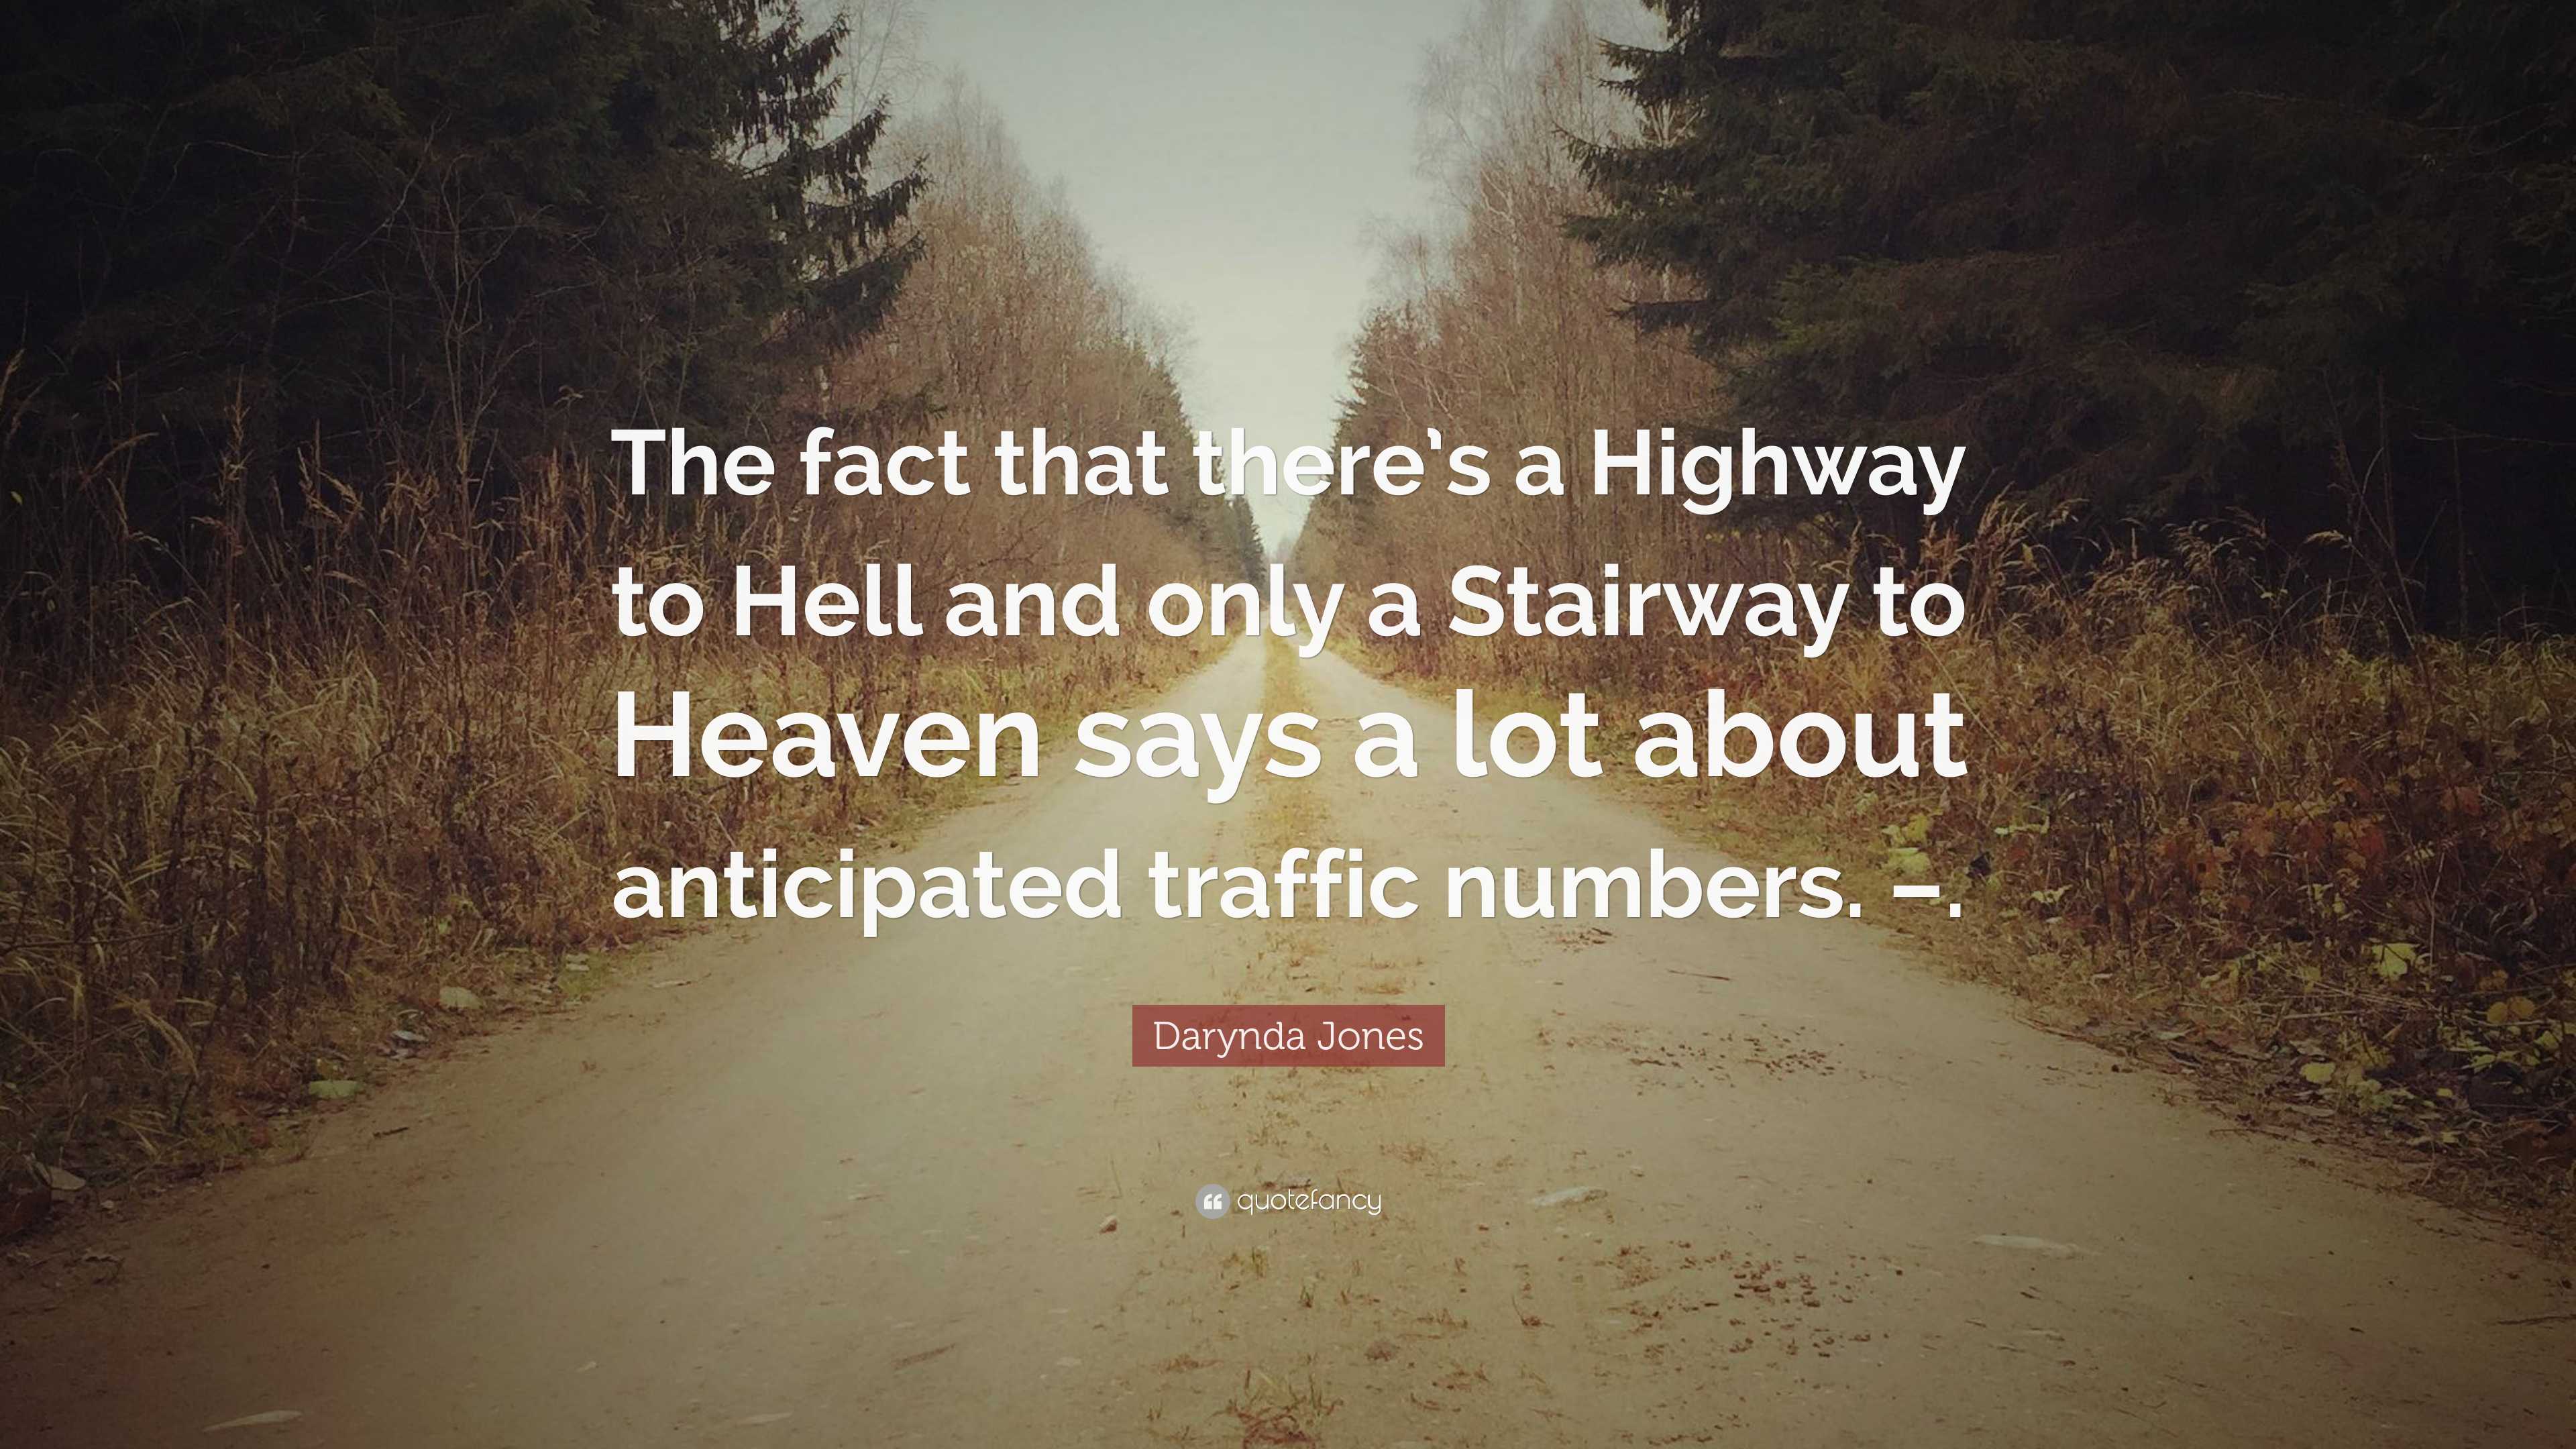 7714752-Darynda-Jones-Quote-The-fact-that-there-s-a-Highway-to-Hell-and